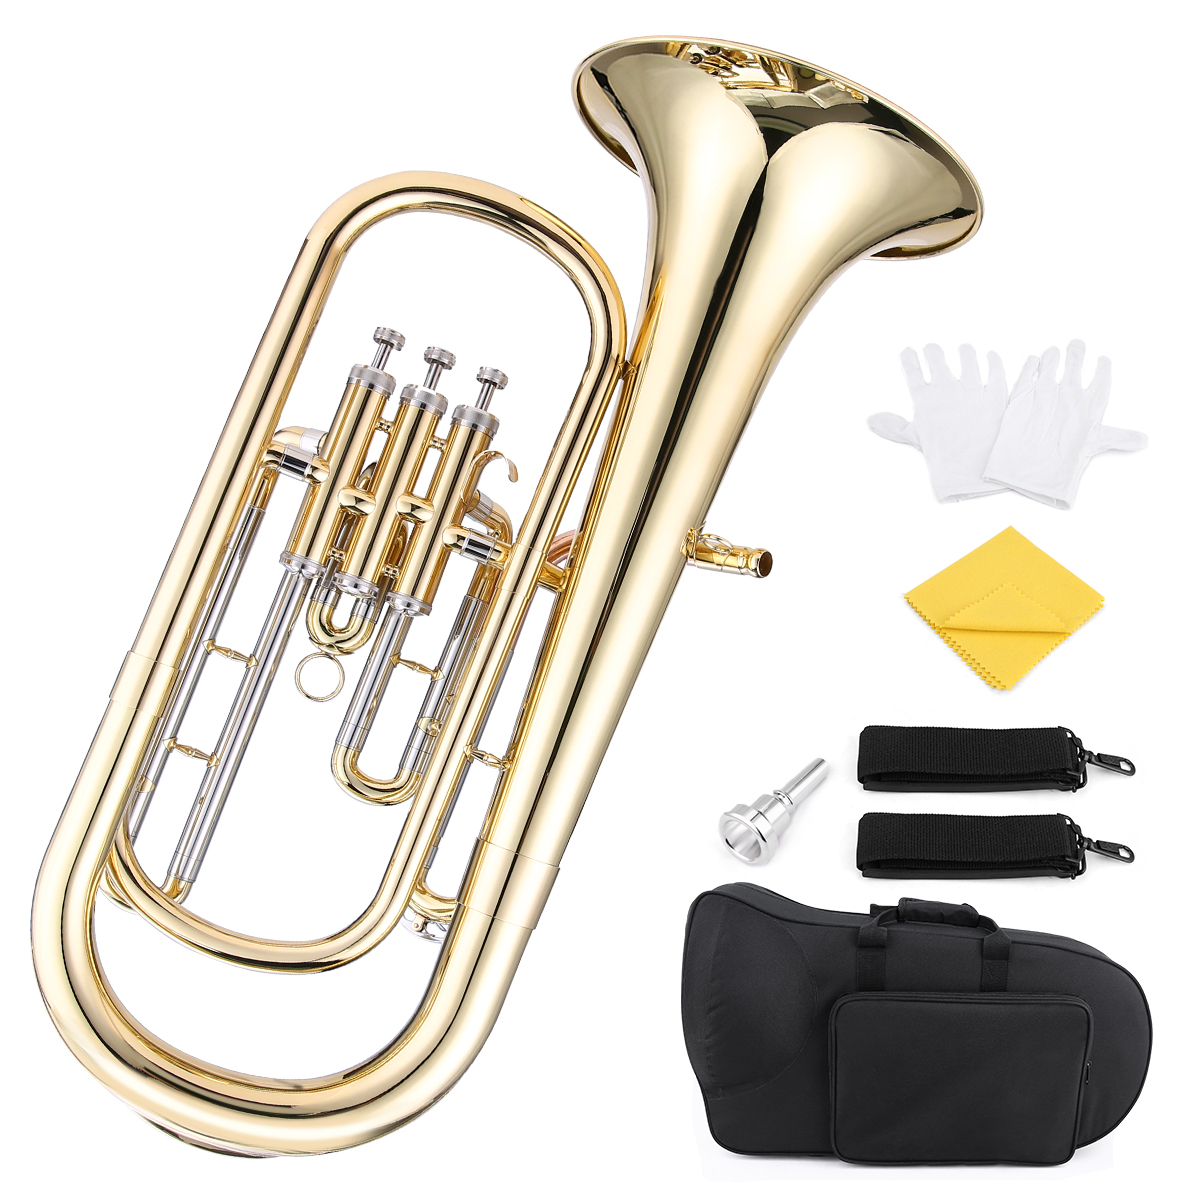 Muslady Mini Pocket Trumpet Bb Flat Brass Material Wind Instrument with  Mouthpiece Gloves Cleaning Cloth Carrying Case 